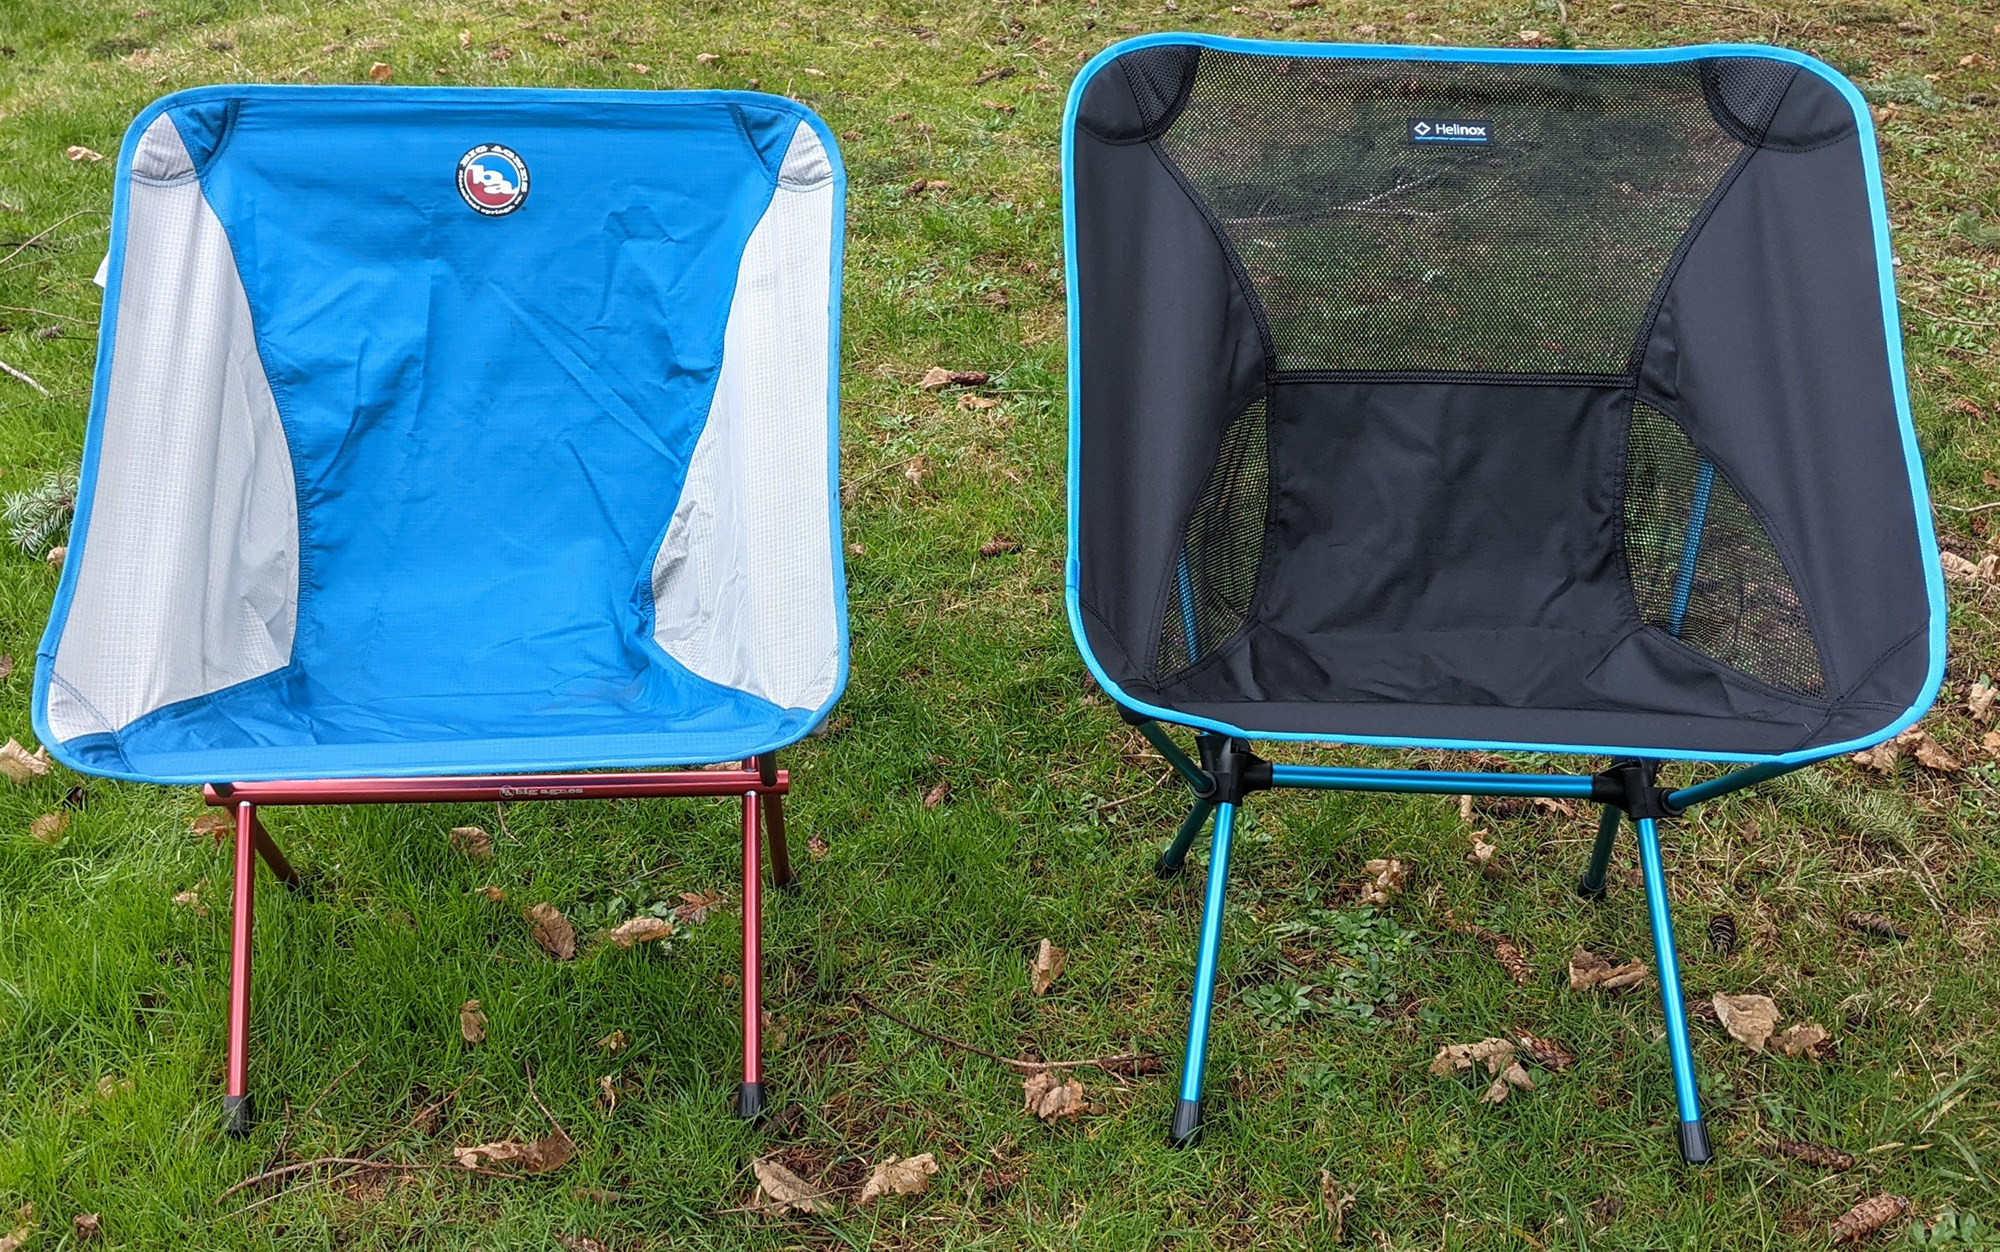 During testing, the Helinox Chair One XL just squeaked out the Big Agnes Mica Basin XL as the best for big guys.